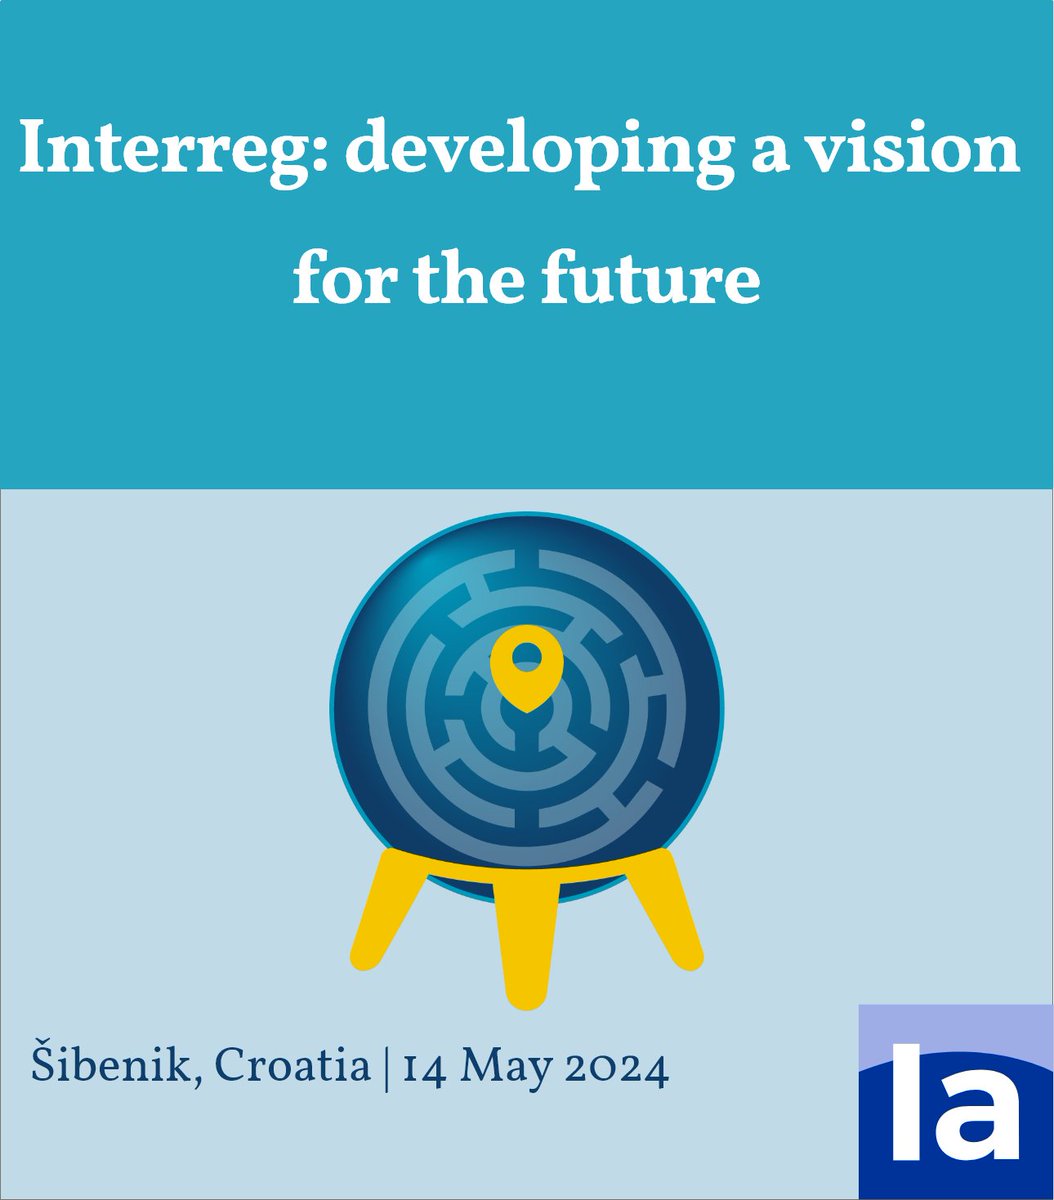 The @EU_CoR , together with Interact and the Croatian Presidency of the EUSAIR, is organising a conference to take stock of experience across all strands of Interreg and wider ETC. Join us on 14 May in Šibenik, Croatia. Find out more here: interact.eu/events/87